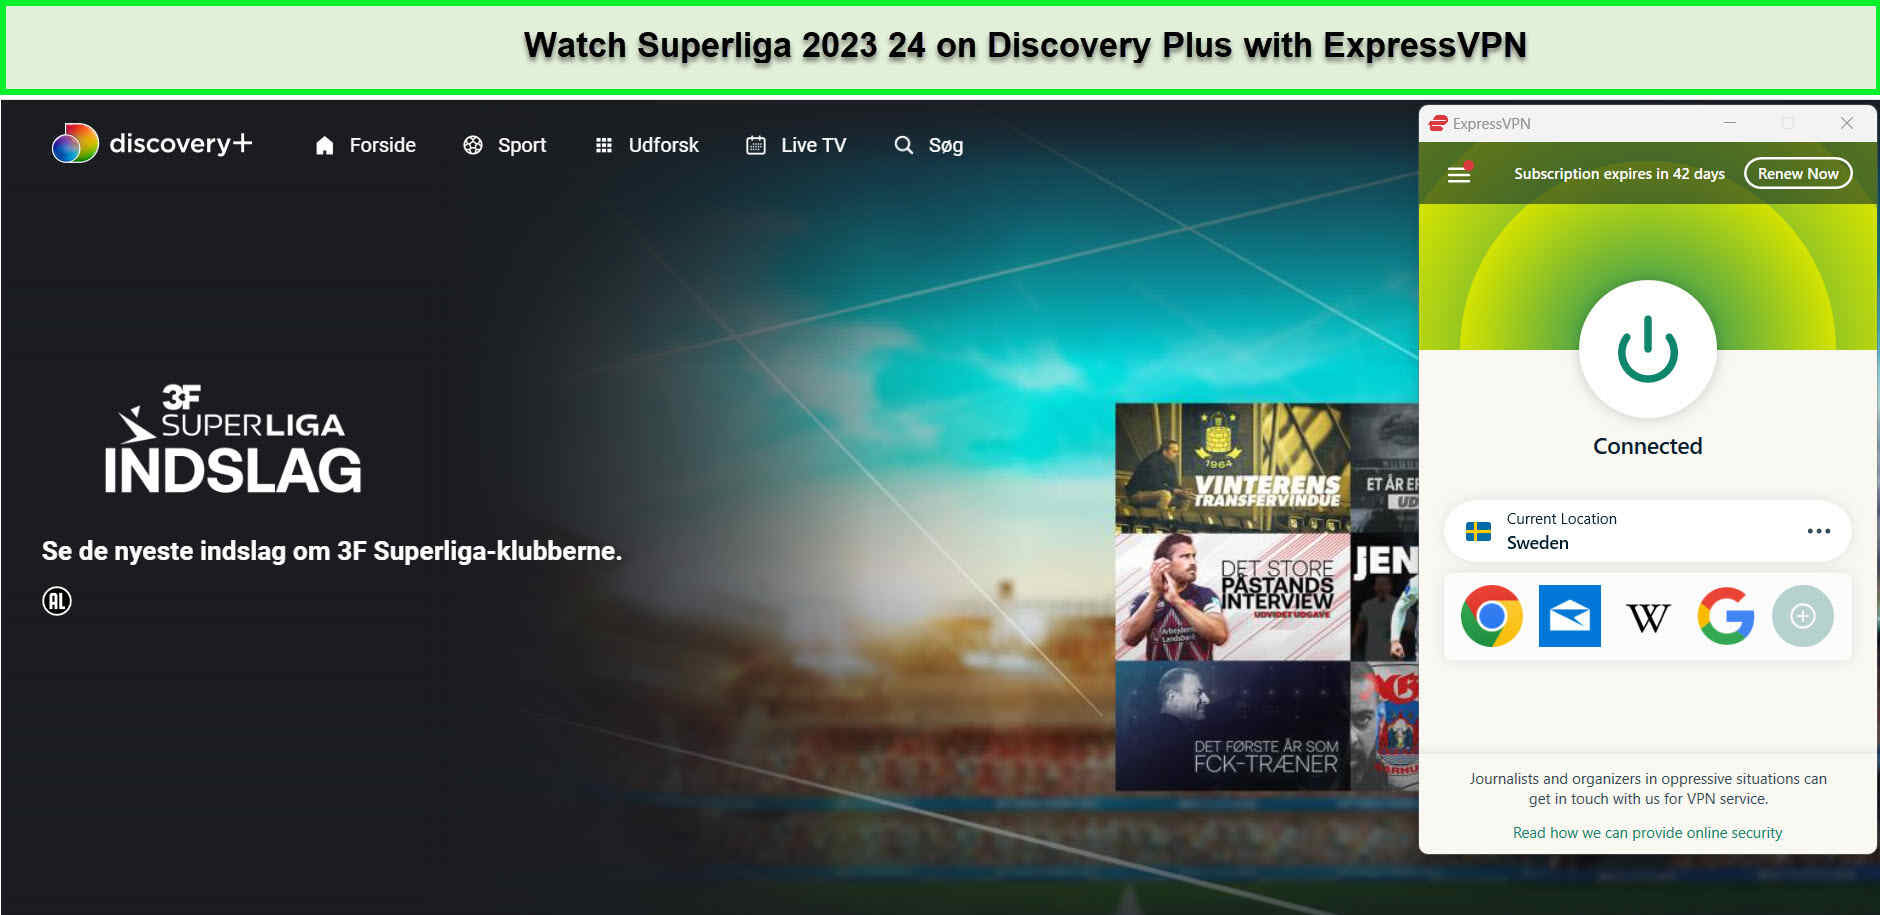 Watch-Superliga-2023-24-in-Singapore-on-Discovery-Plus-with-ExpressVPN!